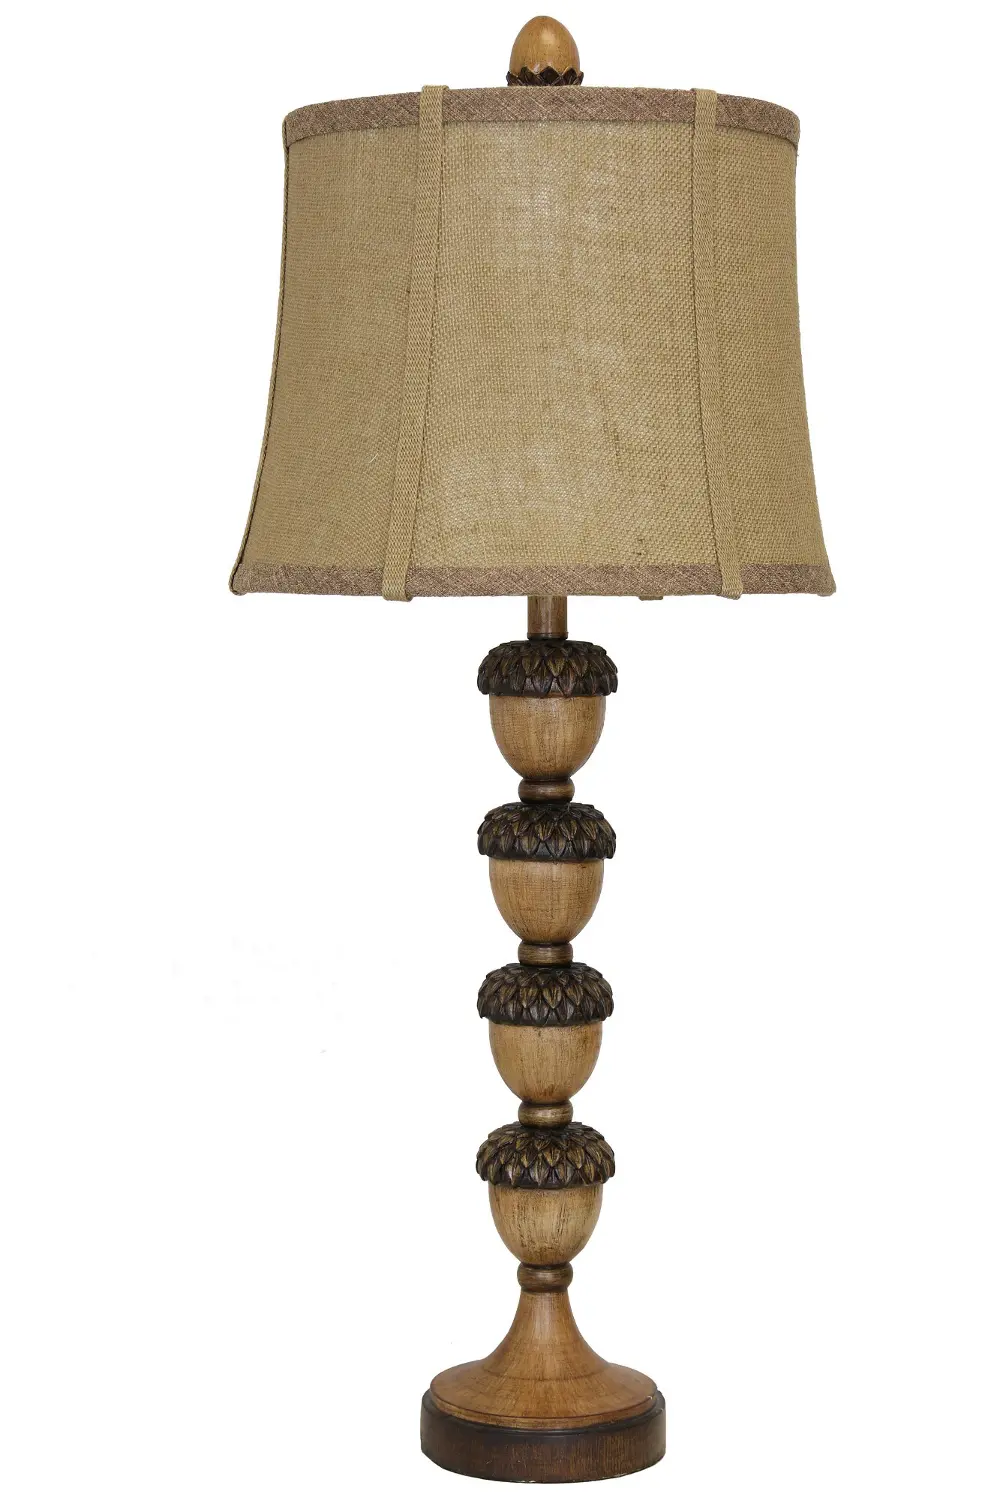 Stacking Acorn Table Lamp with Fabric Shade - Mossy Oak-1